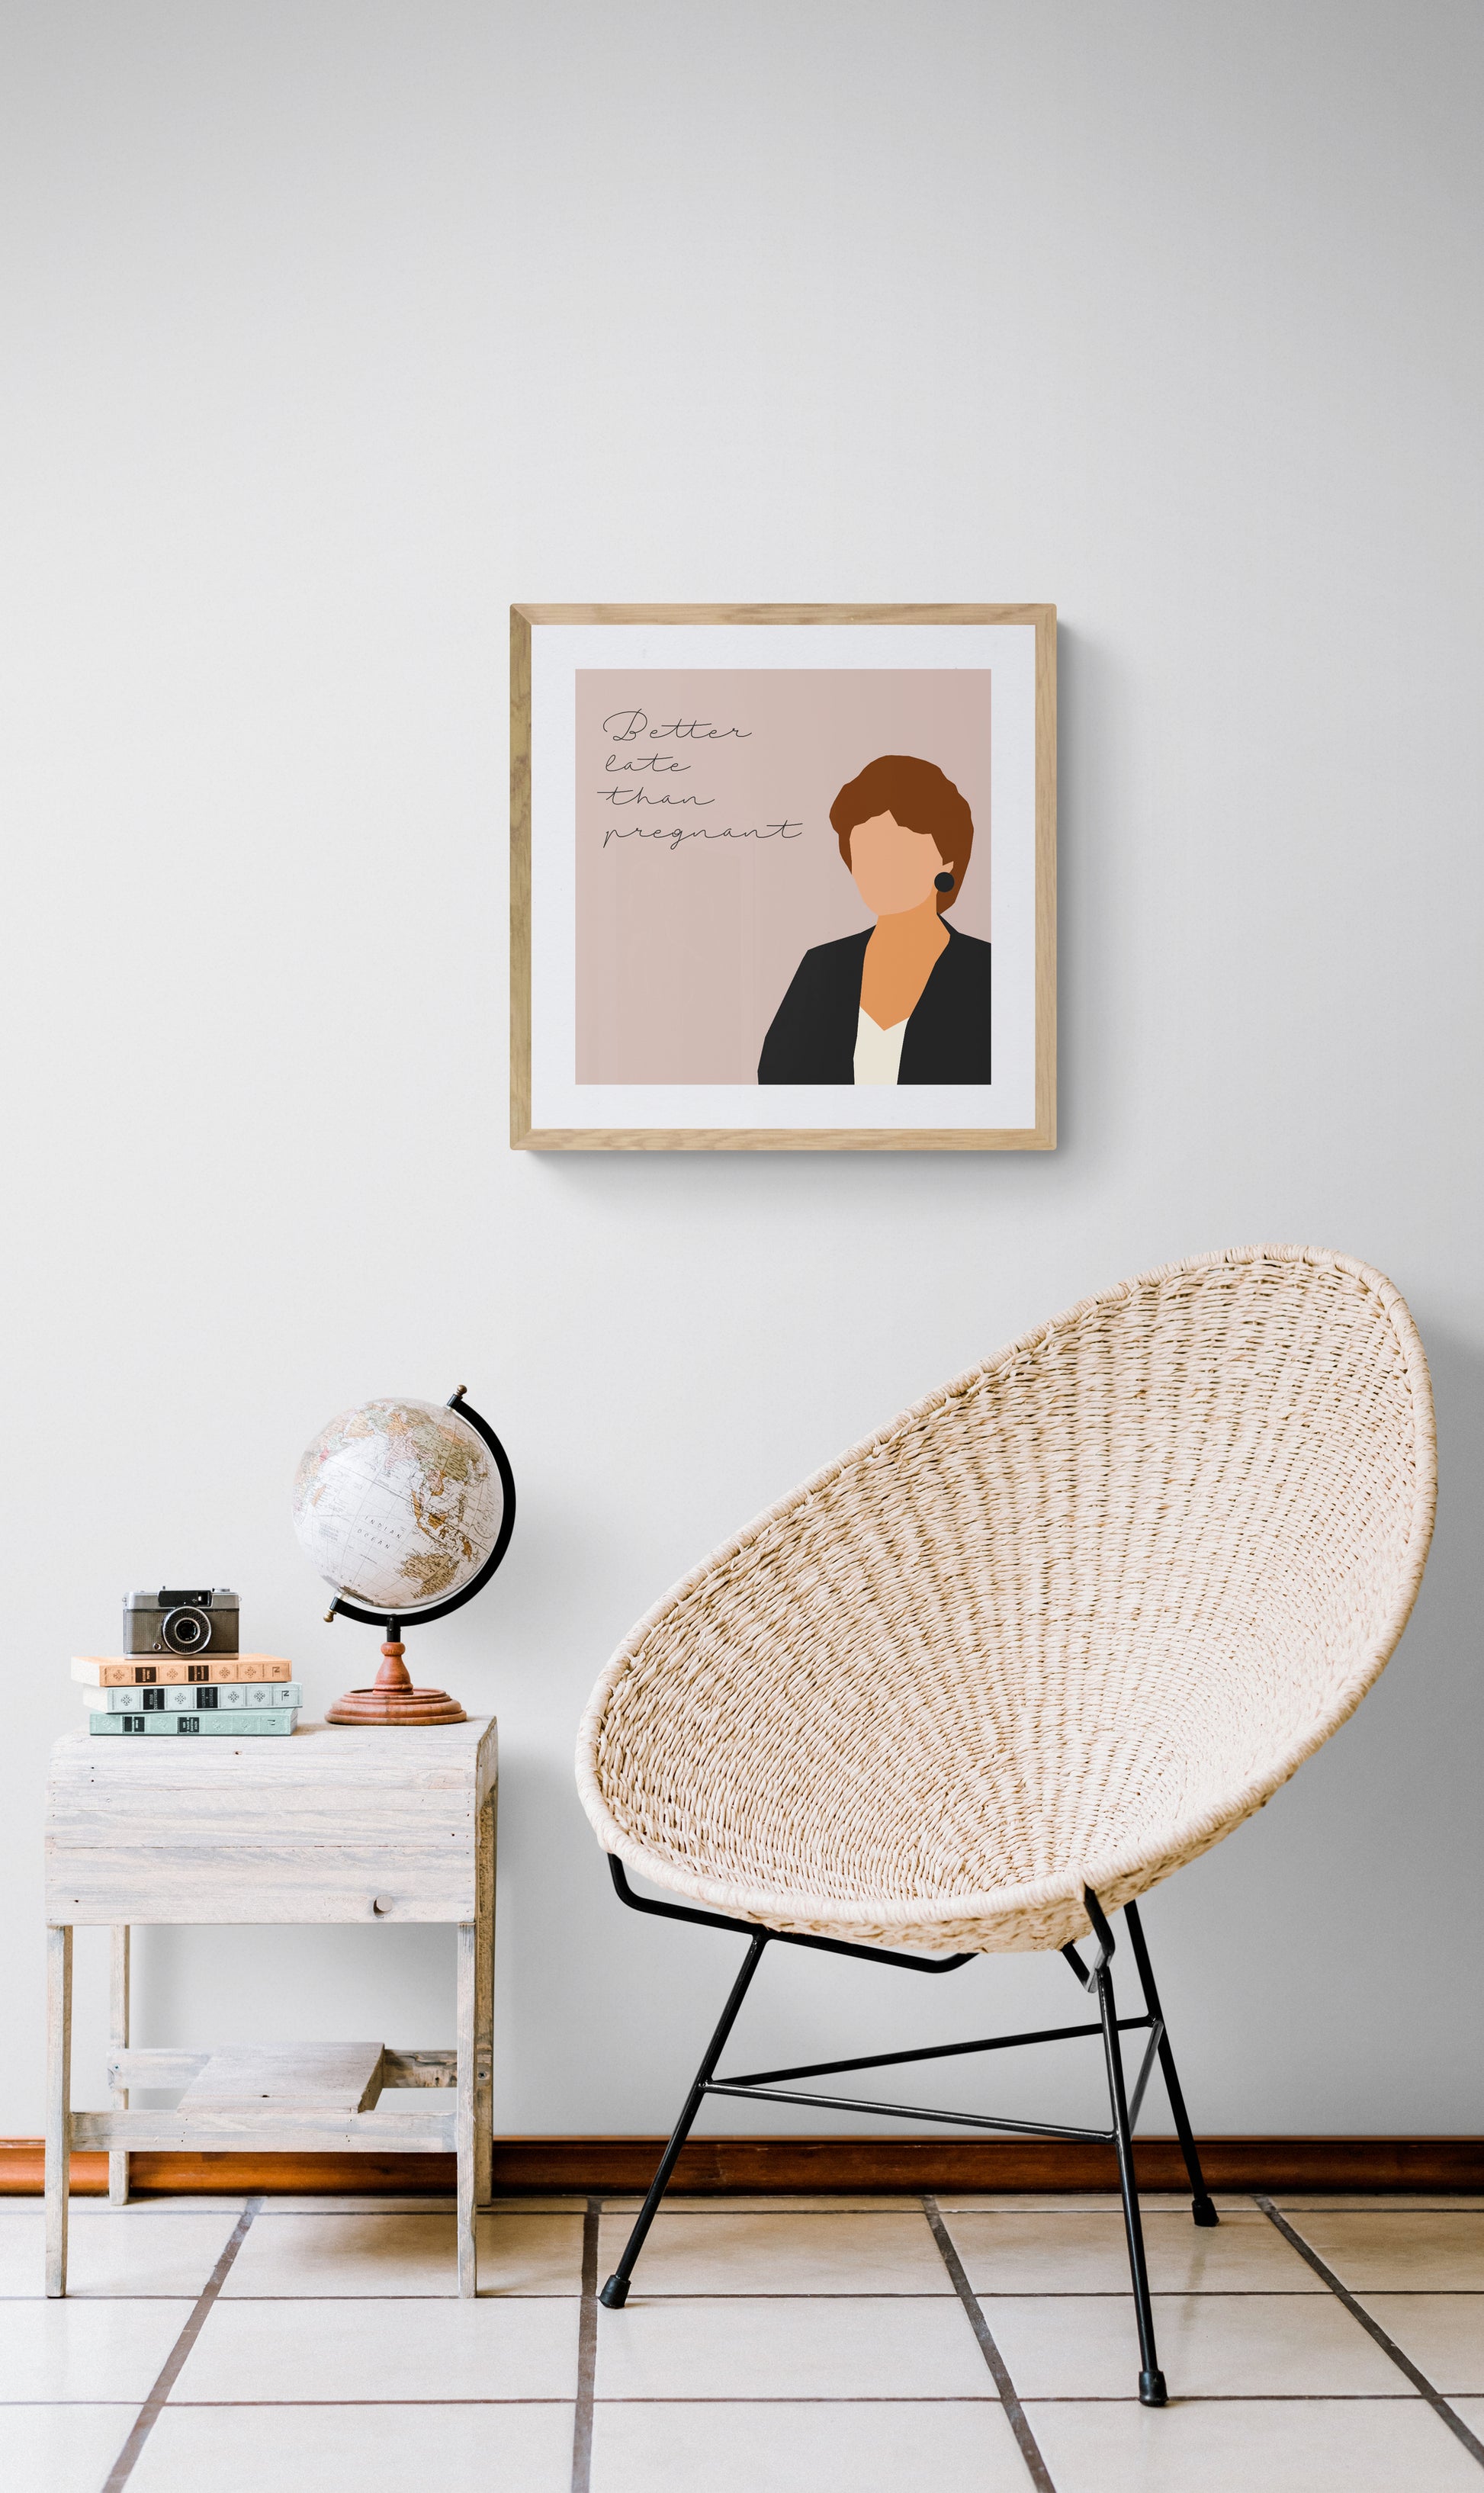 Blanche Devereaux portrait with quote "Better late than pregnant"